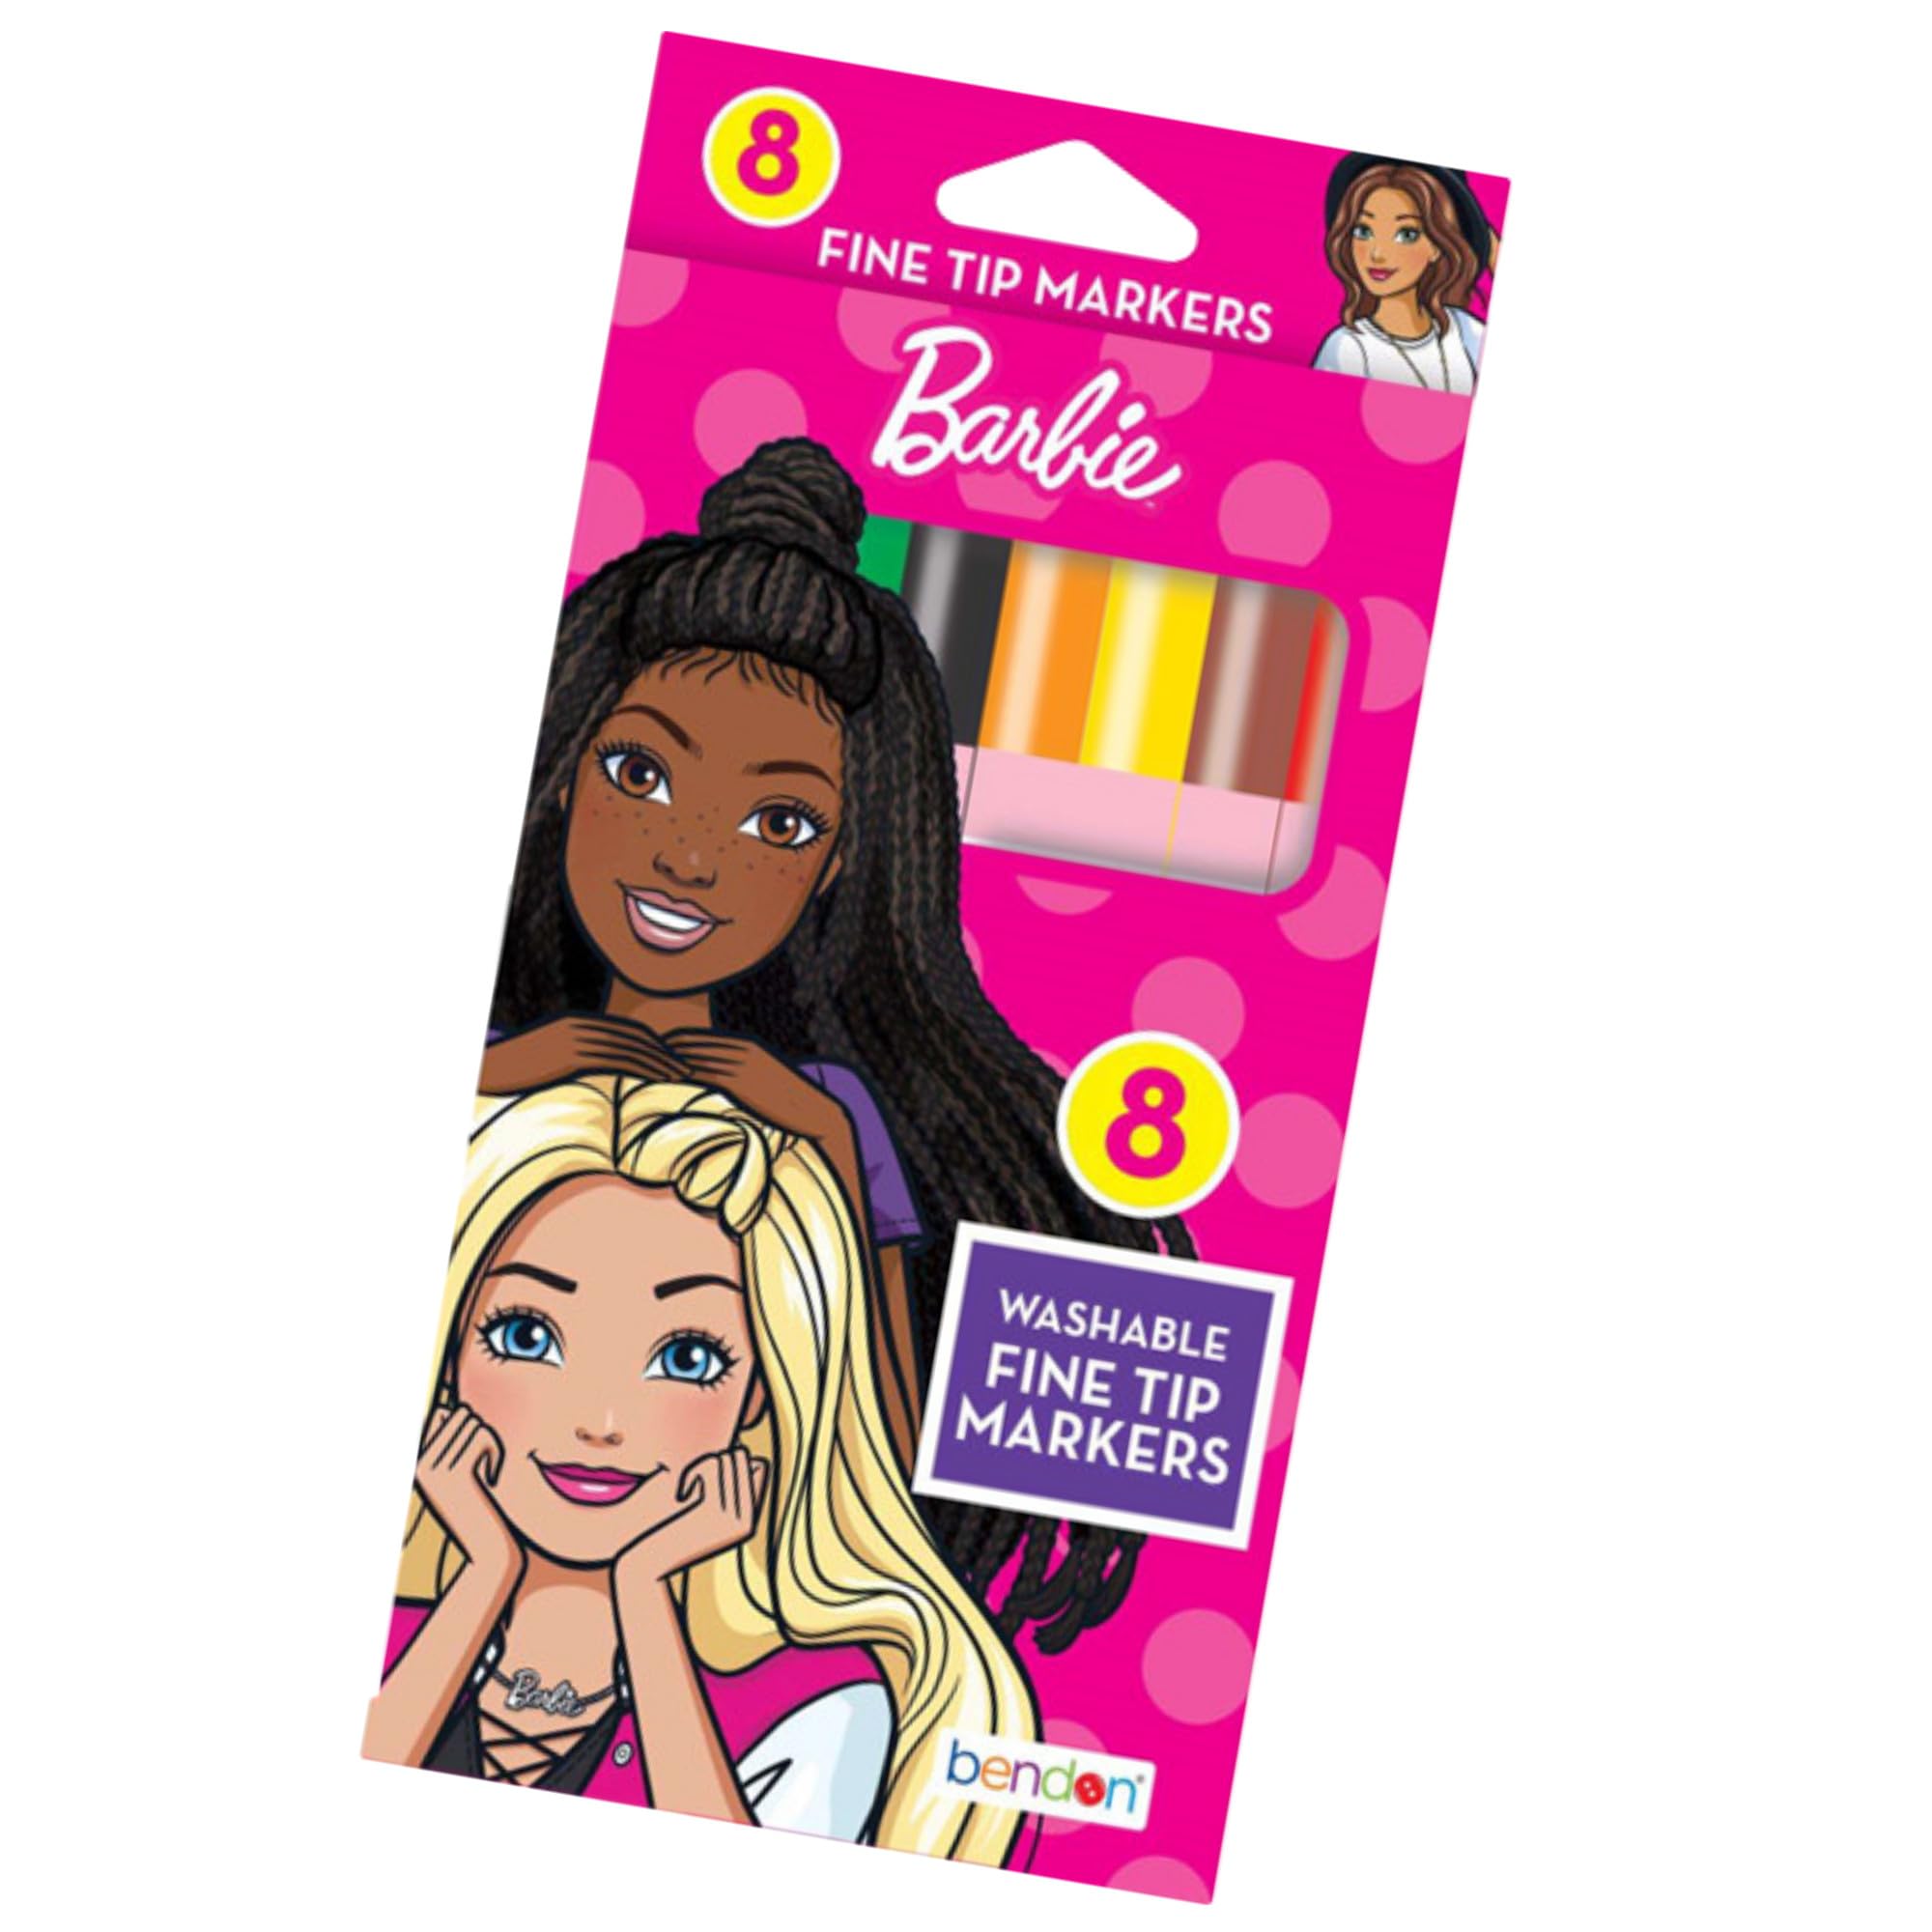 Barbie Sticker Activity Set - Bundle Includes Barbie Stickers, Barbie Coloring Book, and More (White)